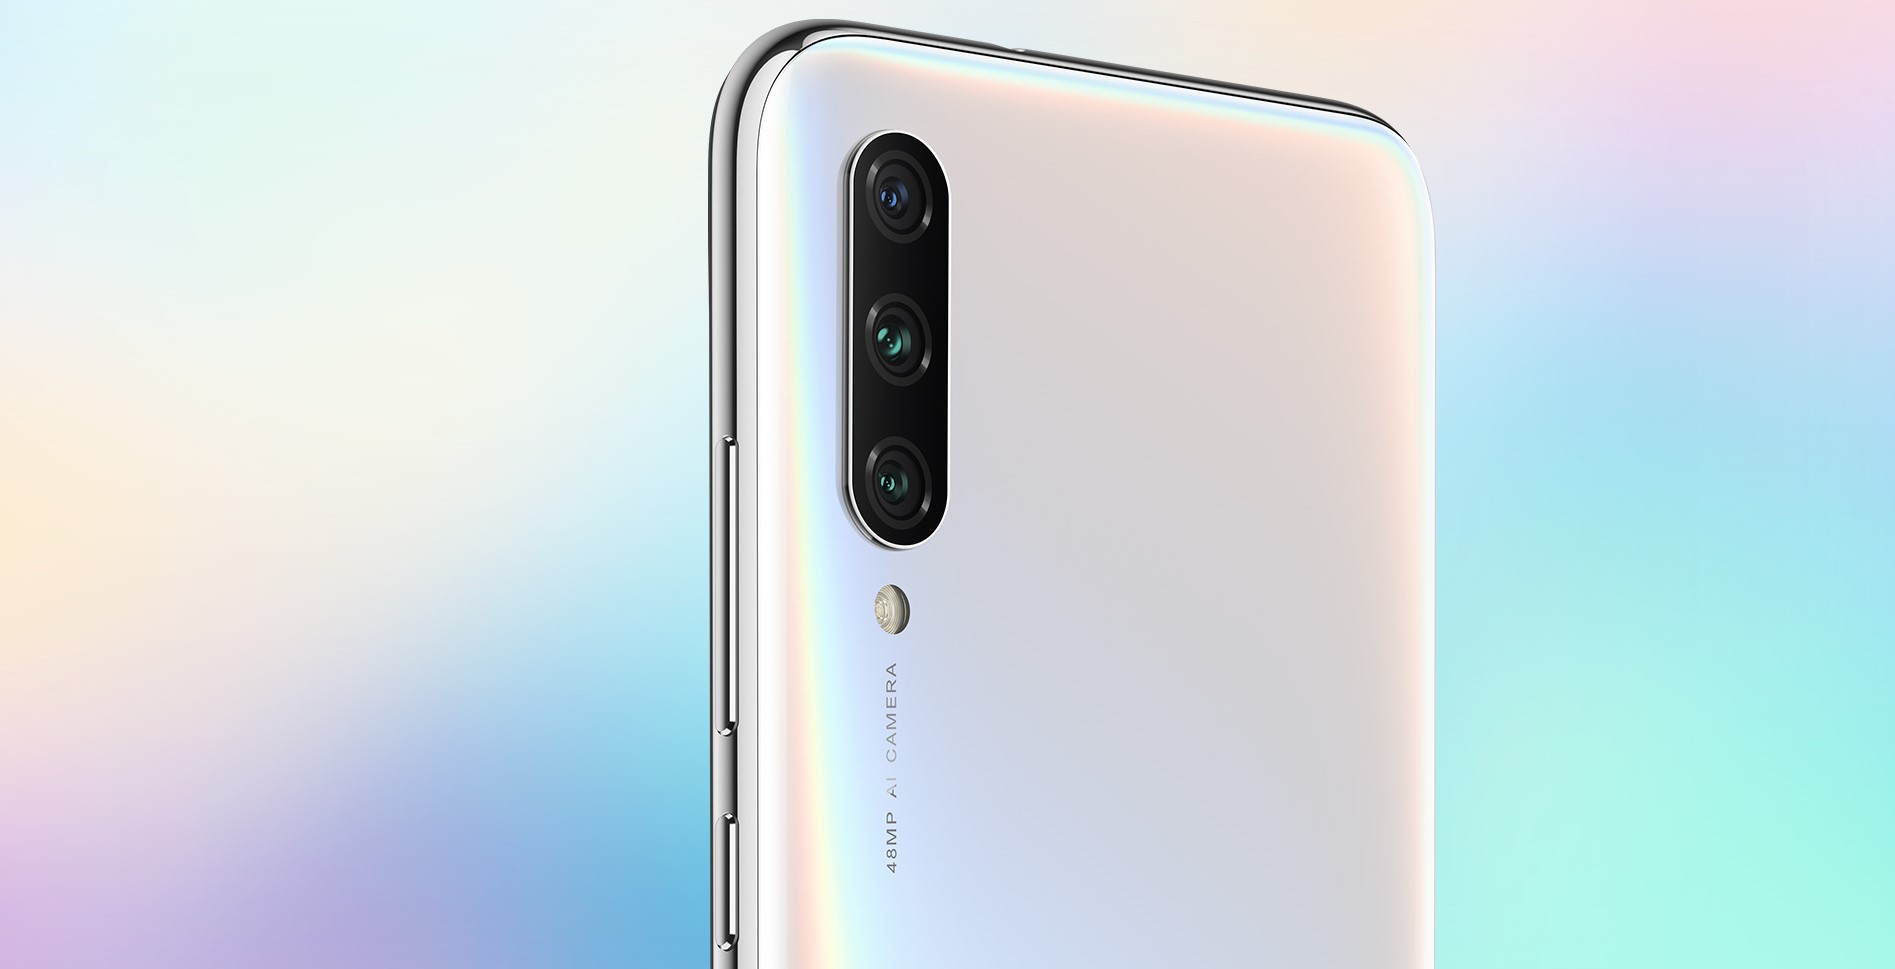 [Update: Live in Europe] Xiaomi Mi A3 is getting new Android 10-based update, what do you think about it?